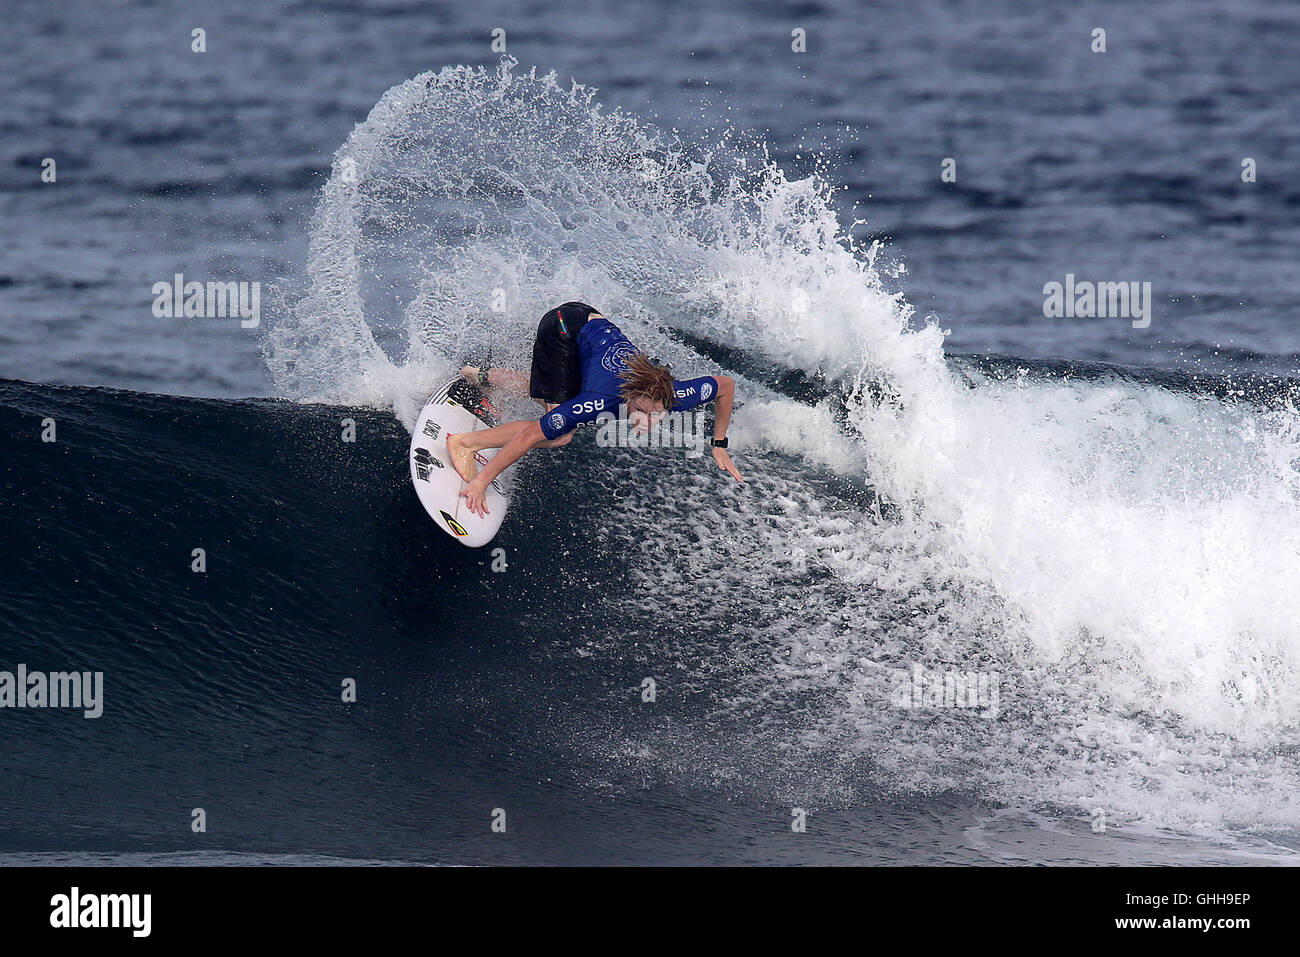 Siargao, Philippines. 28th Sep, 2016. Sandon Whittaker of Australia competes during the final round of the annual International Siargao Surfing Cup in Siargao Island, the Philippines, Sept. 28, 2016. Sandon Whittaker of Australia won the championship and is qualified for the World Surf League Australasia. Credit:  Rouelle Umali/Xinhua/Alamy Live News Stock Photo